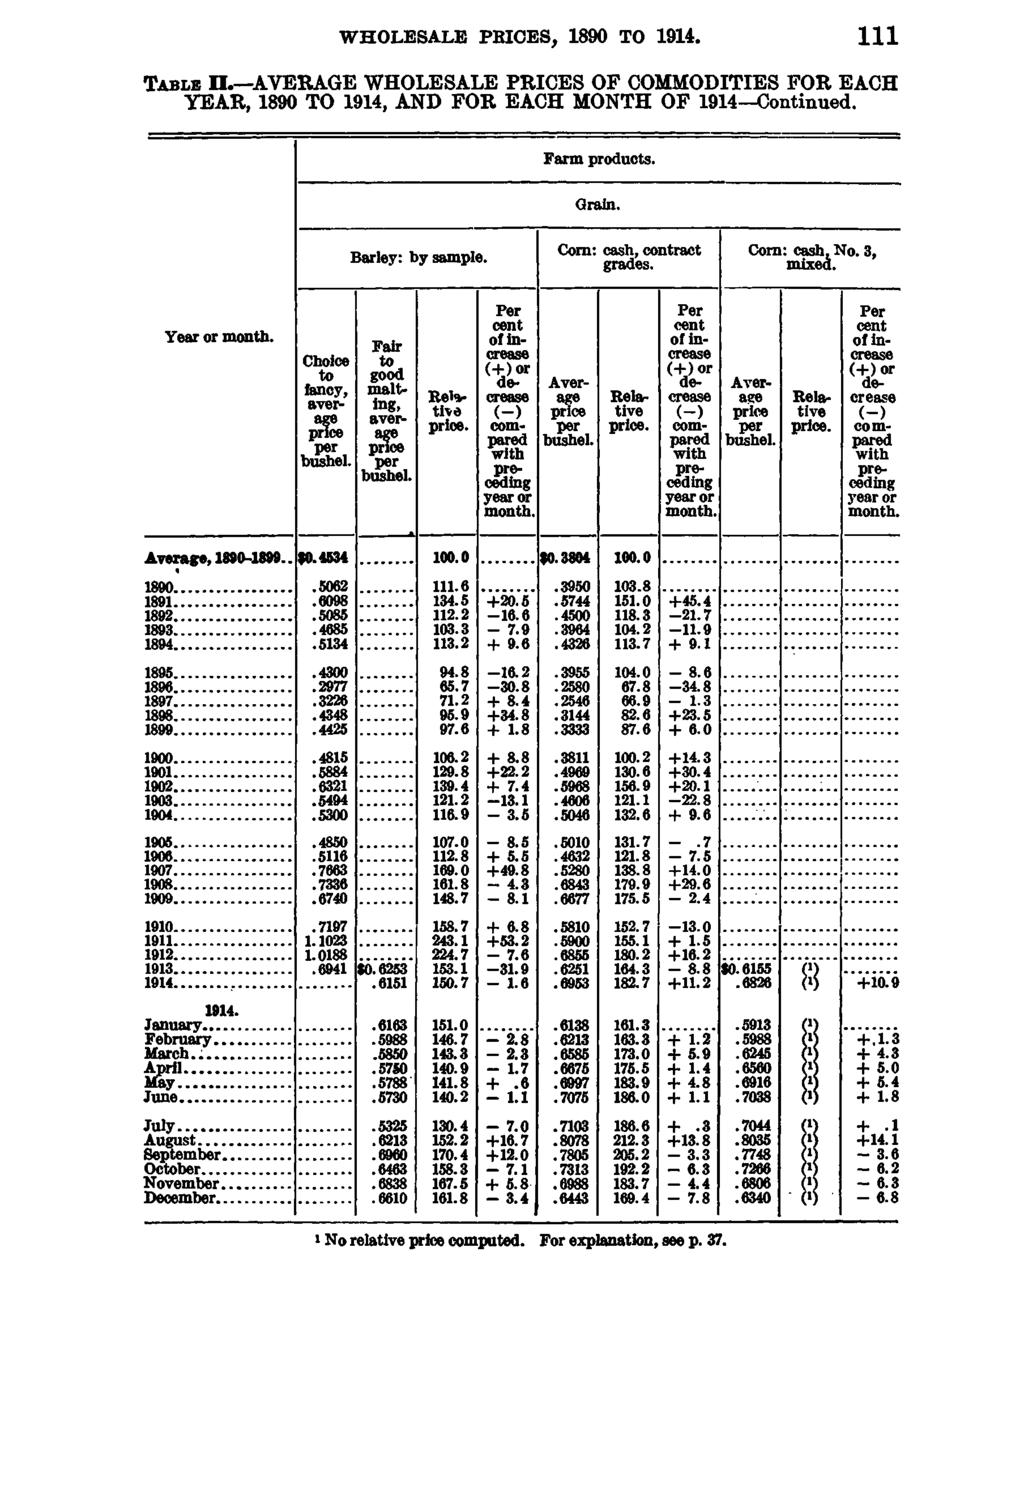 WHOLESALE PRICES, 1890 TO I l l T a b l e I I. AVERAGE WHOLESALE PRICES OF COMMODITIES FOR EACH YEAR, 1890 TO 1914, AND FOR EACH MONTH OF 1914 Continued. Farm products. Grain. Barley: by sample.